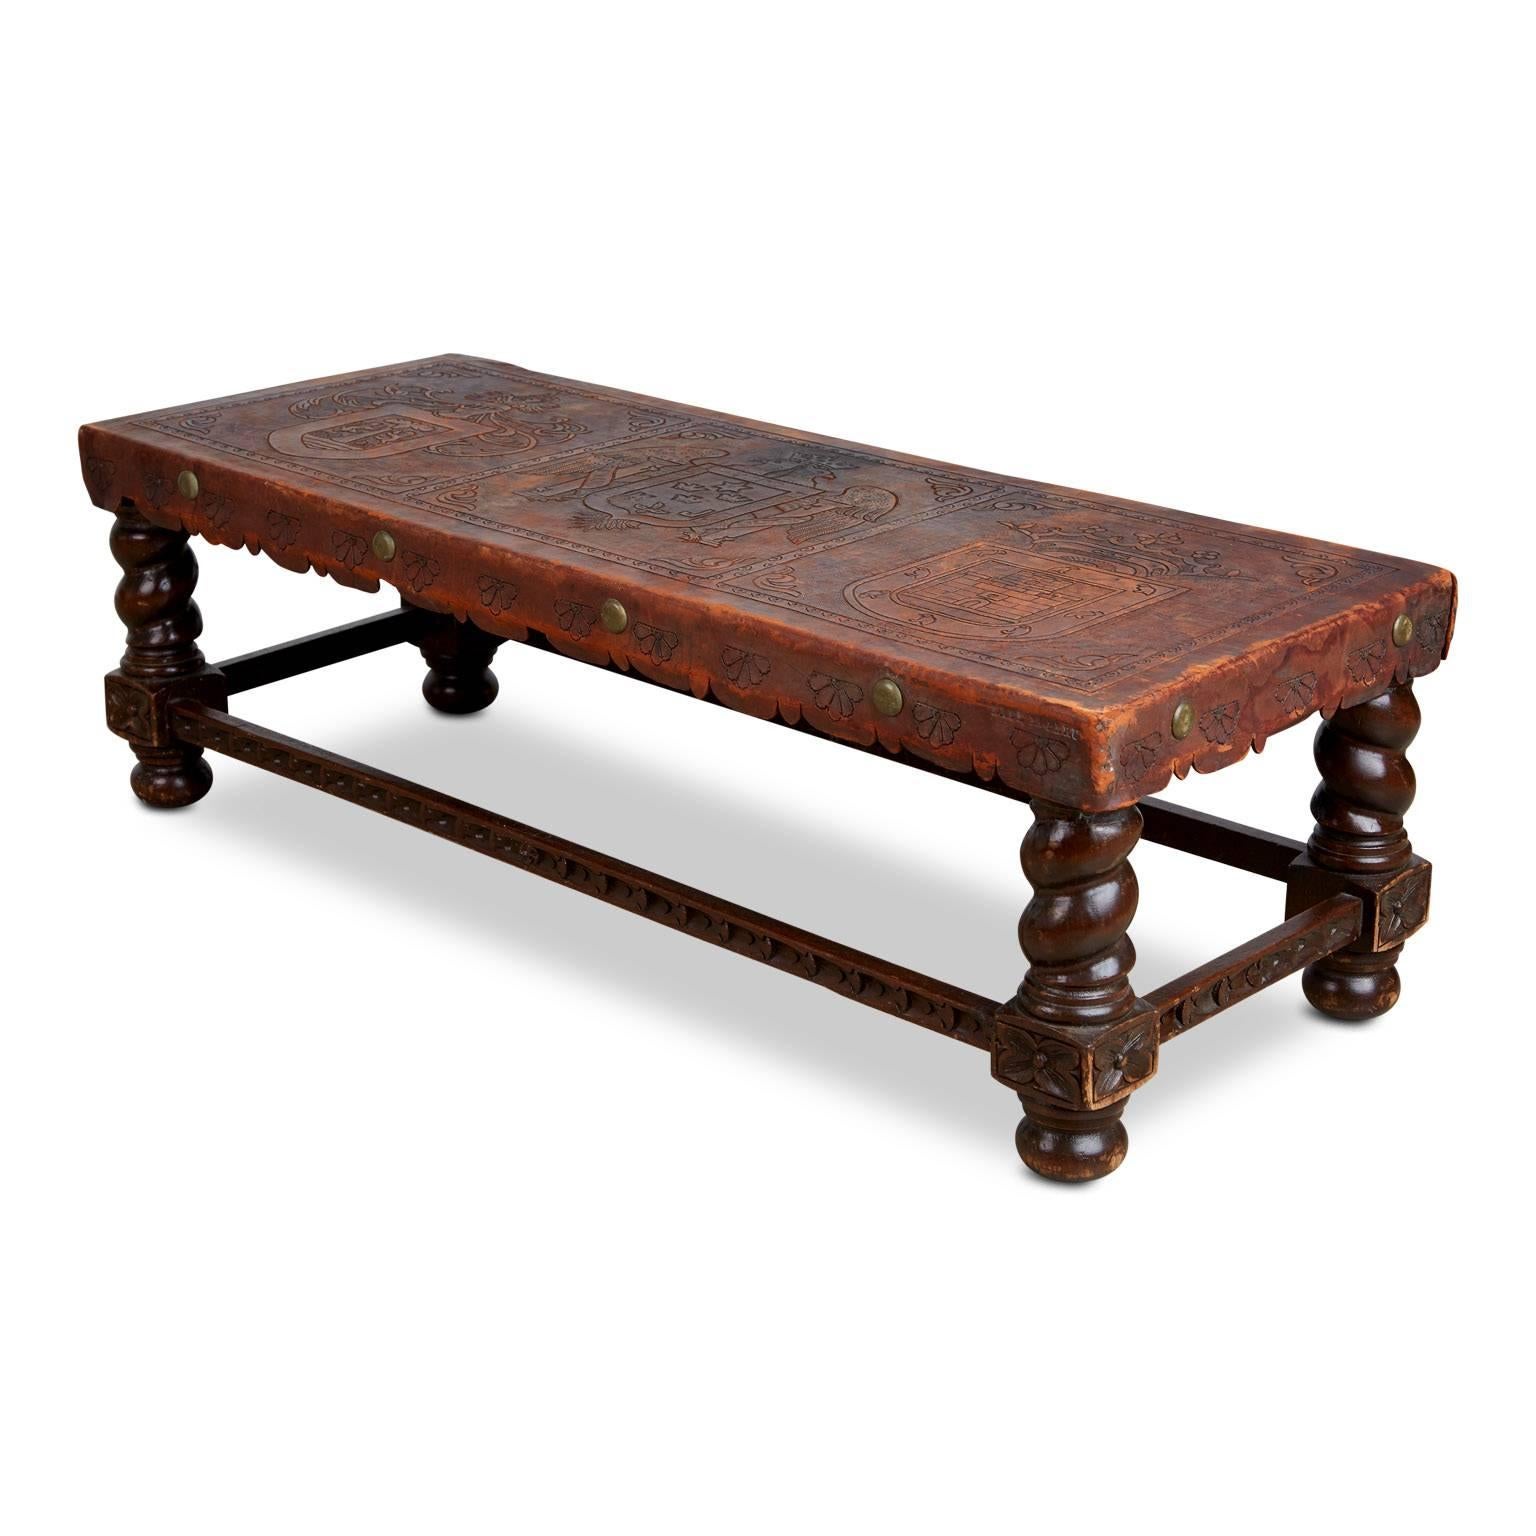 Beautiful hand tooled Peruvian piece which can be either used as a bench or coffee table. Comprised of turned wood legs with a dark stain and leather top illustrated with embossed shields. The sides of this piece feature scalloped details with